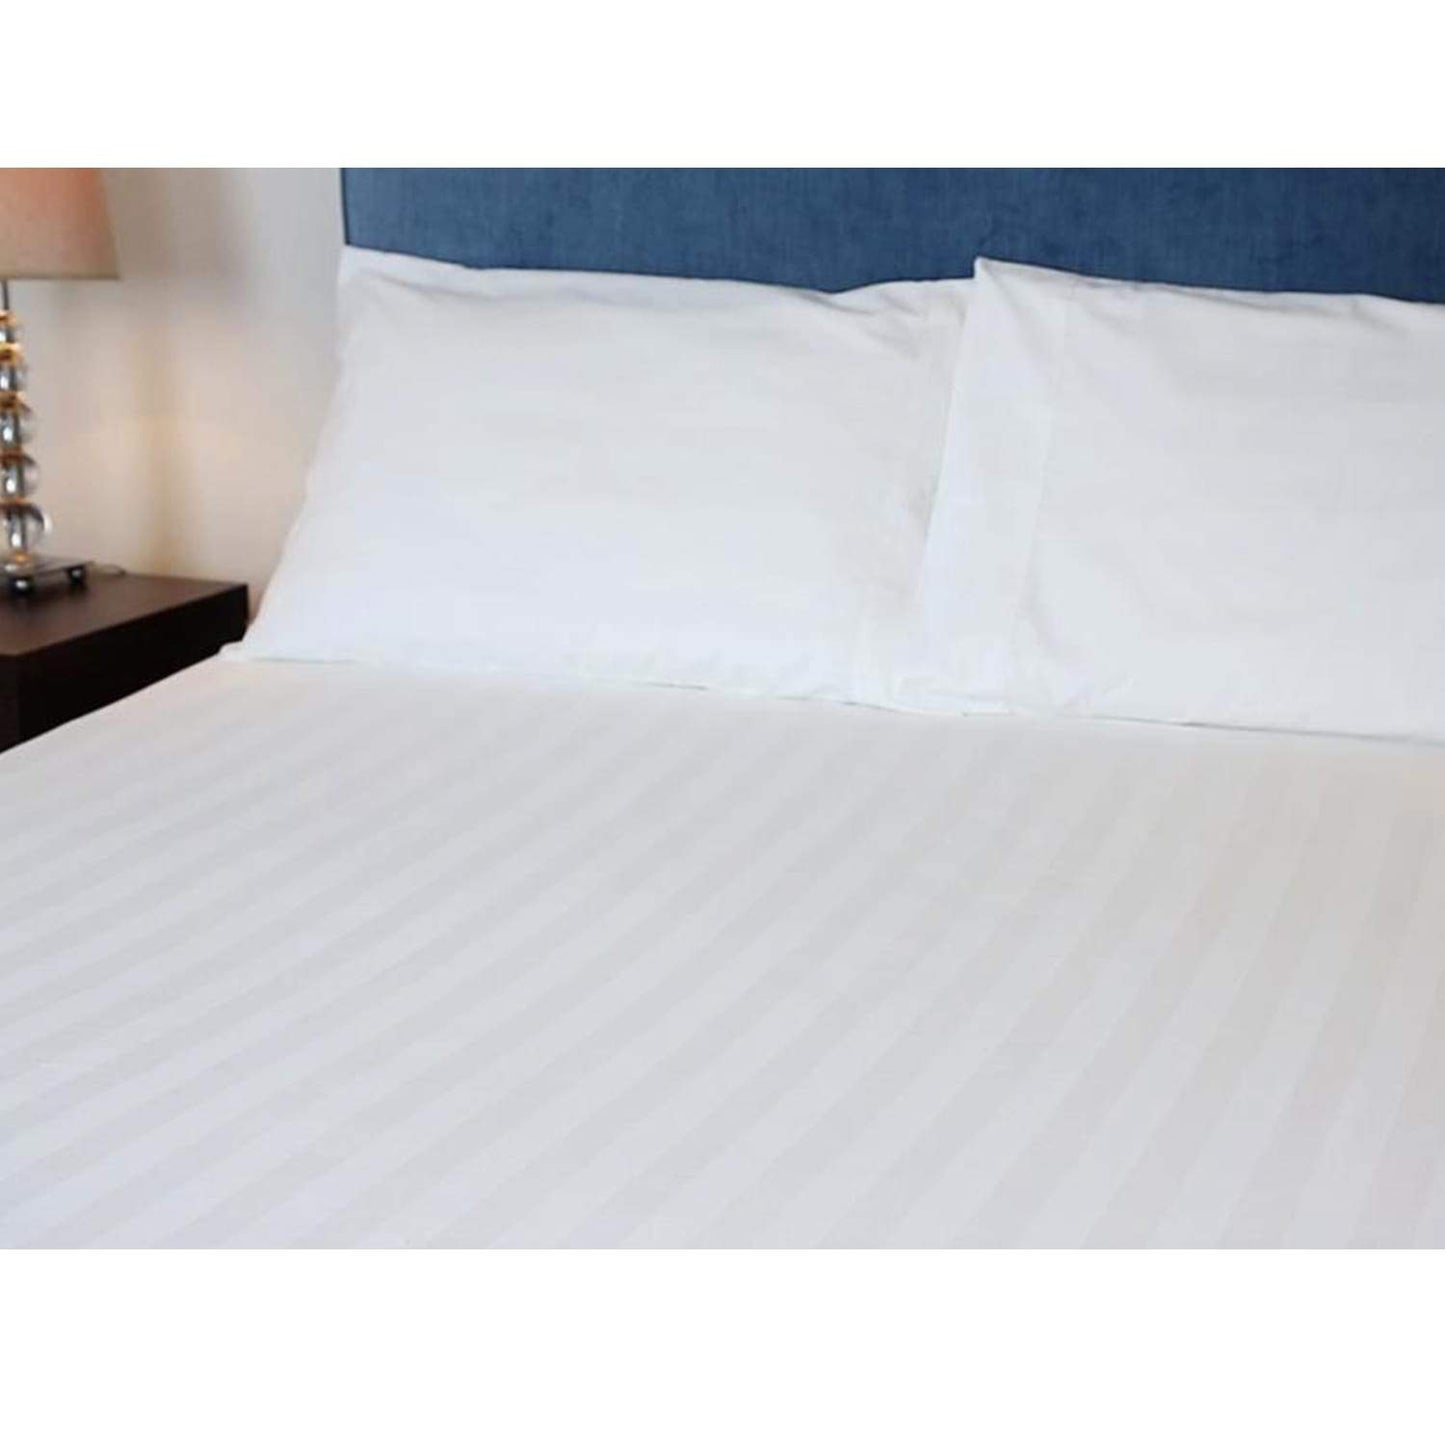 Royal Deluxe Breathable Cotton Dream Sheet Set on a bed